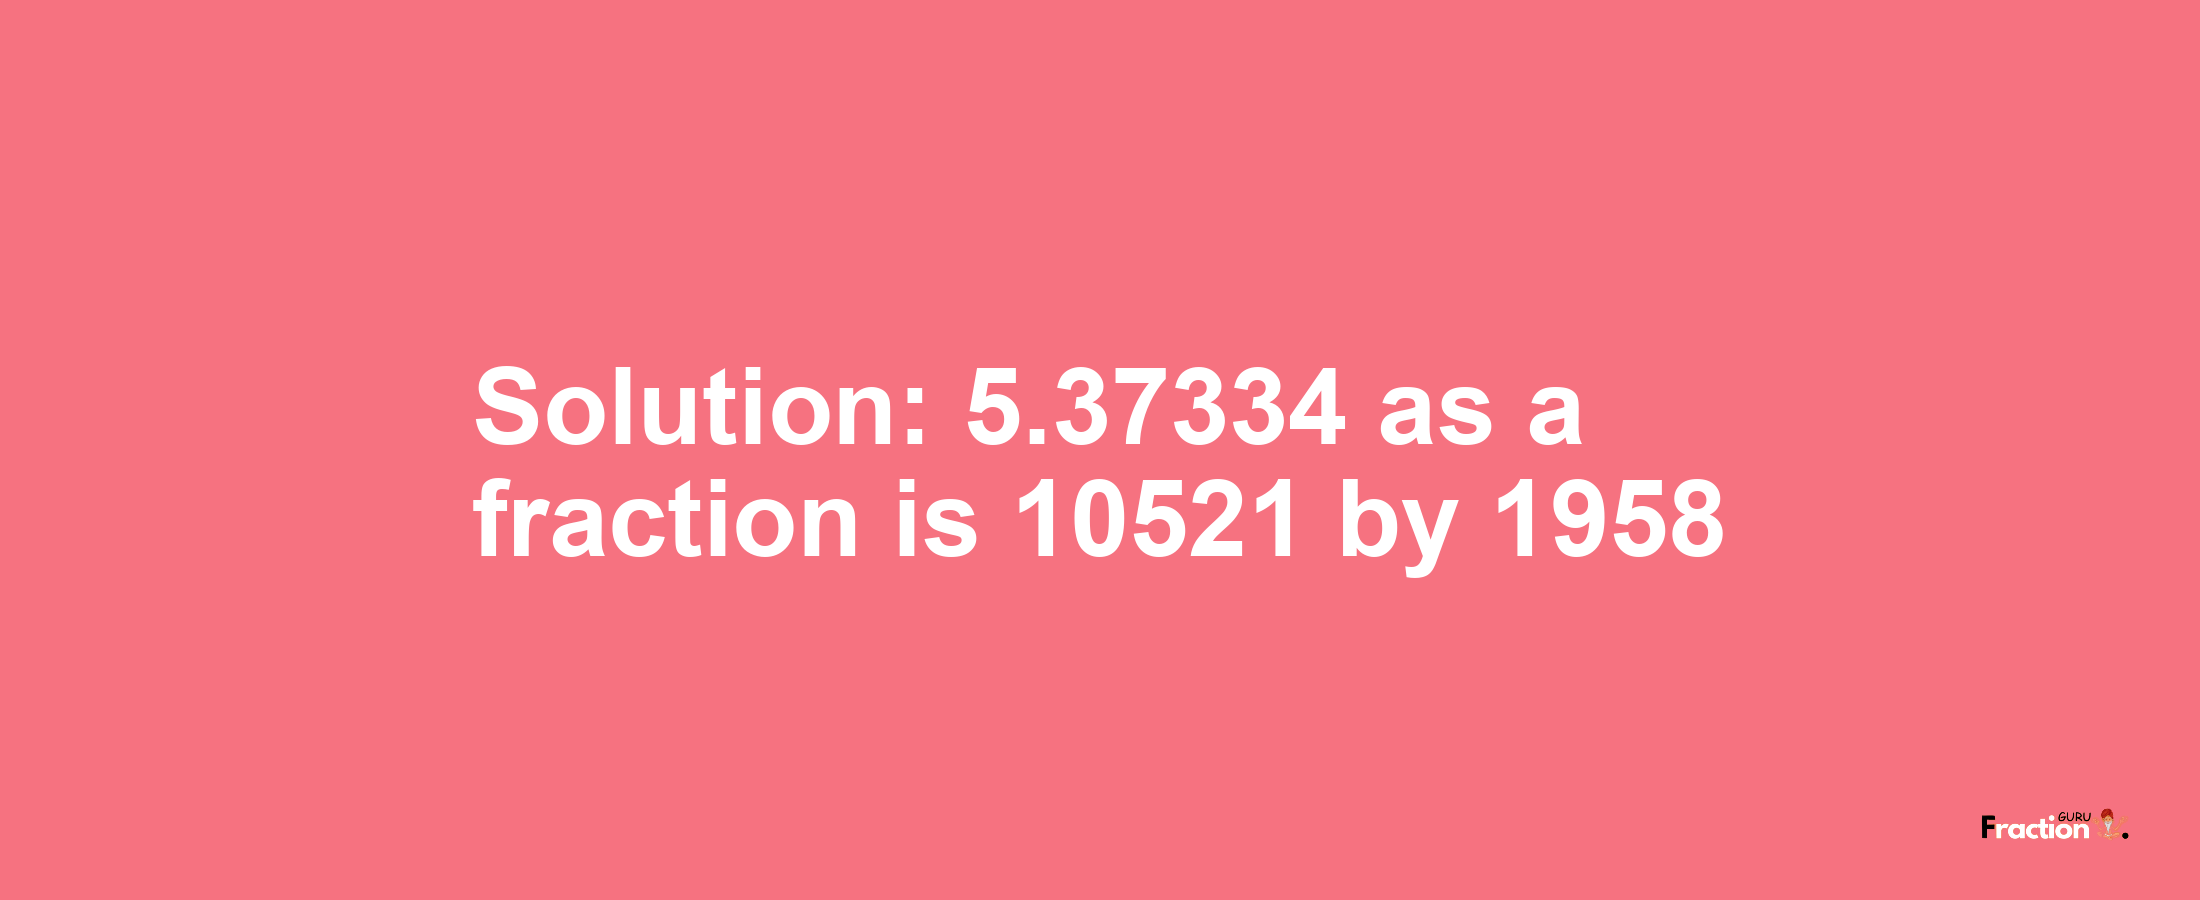 Solution:5.37334 as a fraction is 10521/1958